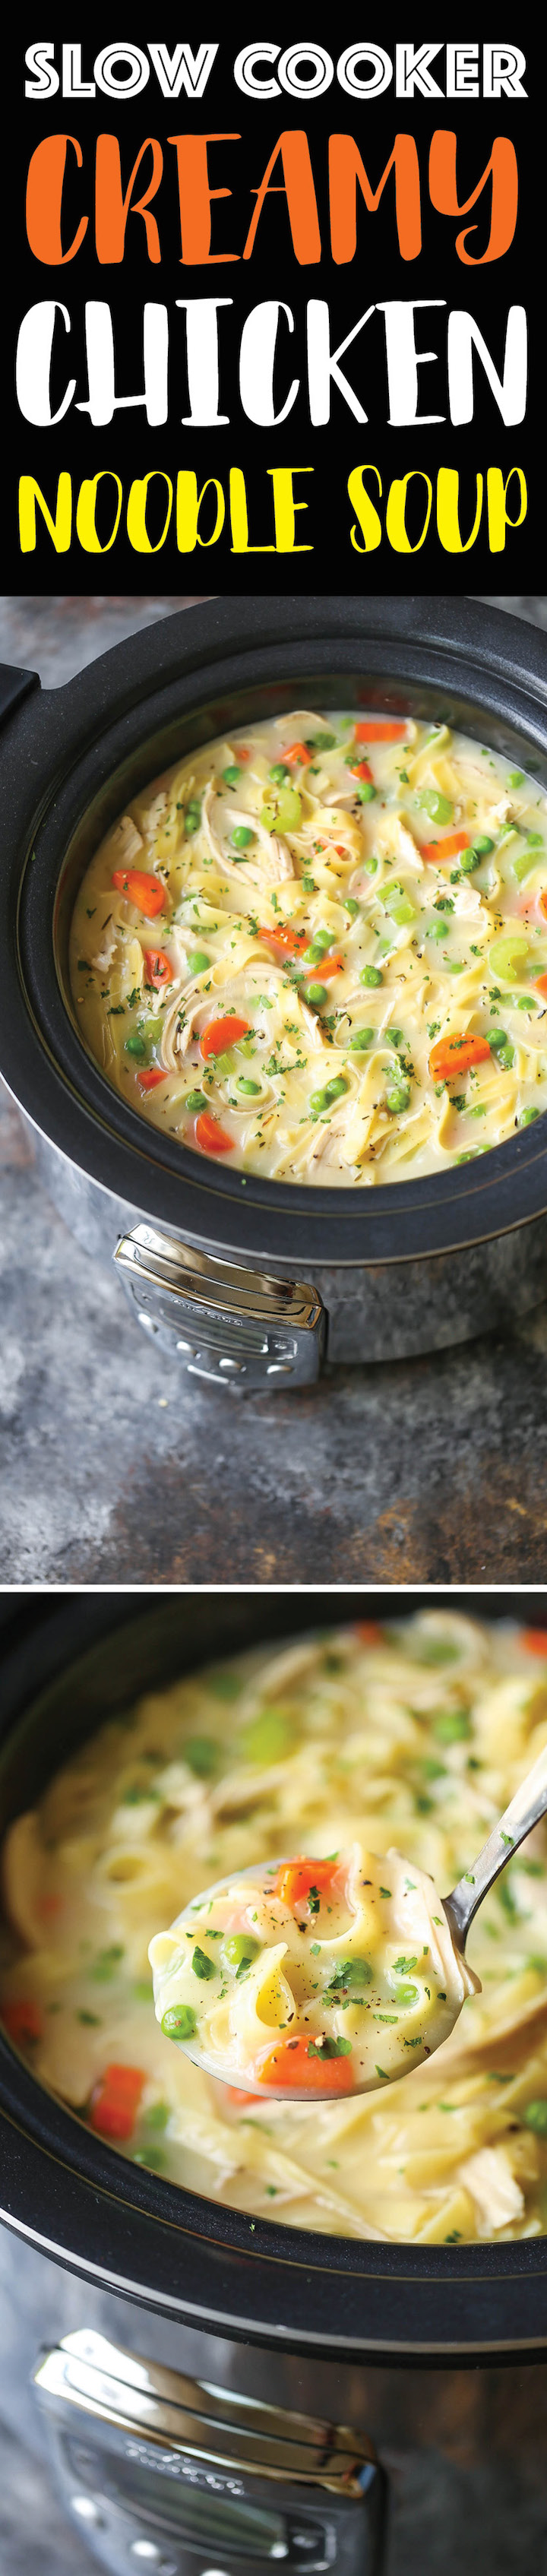 Slow Cooker Creamy Chicken Noodle Soup - The creamiest chicken noodle soup ever! Made effortlessly in your crockpot. Even the pasta gets cooked right in!